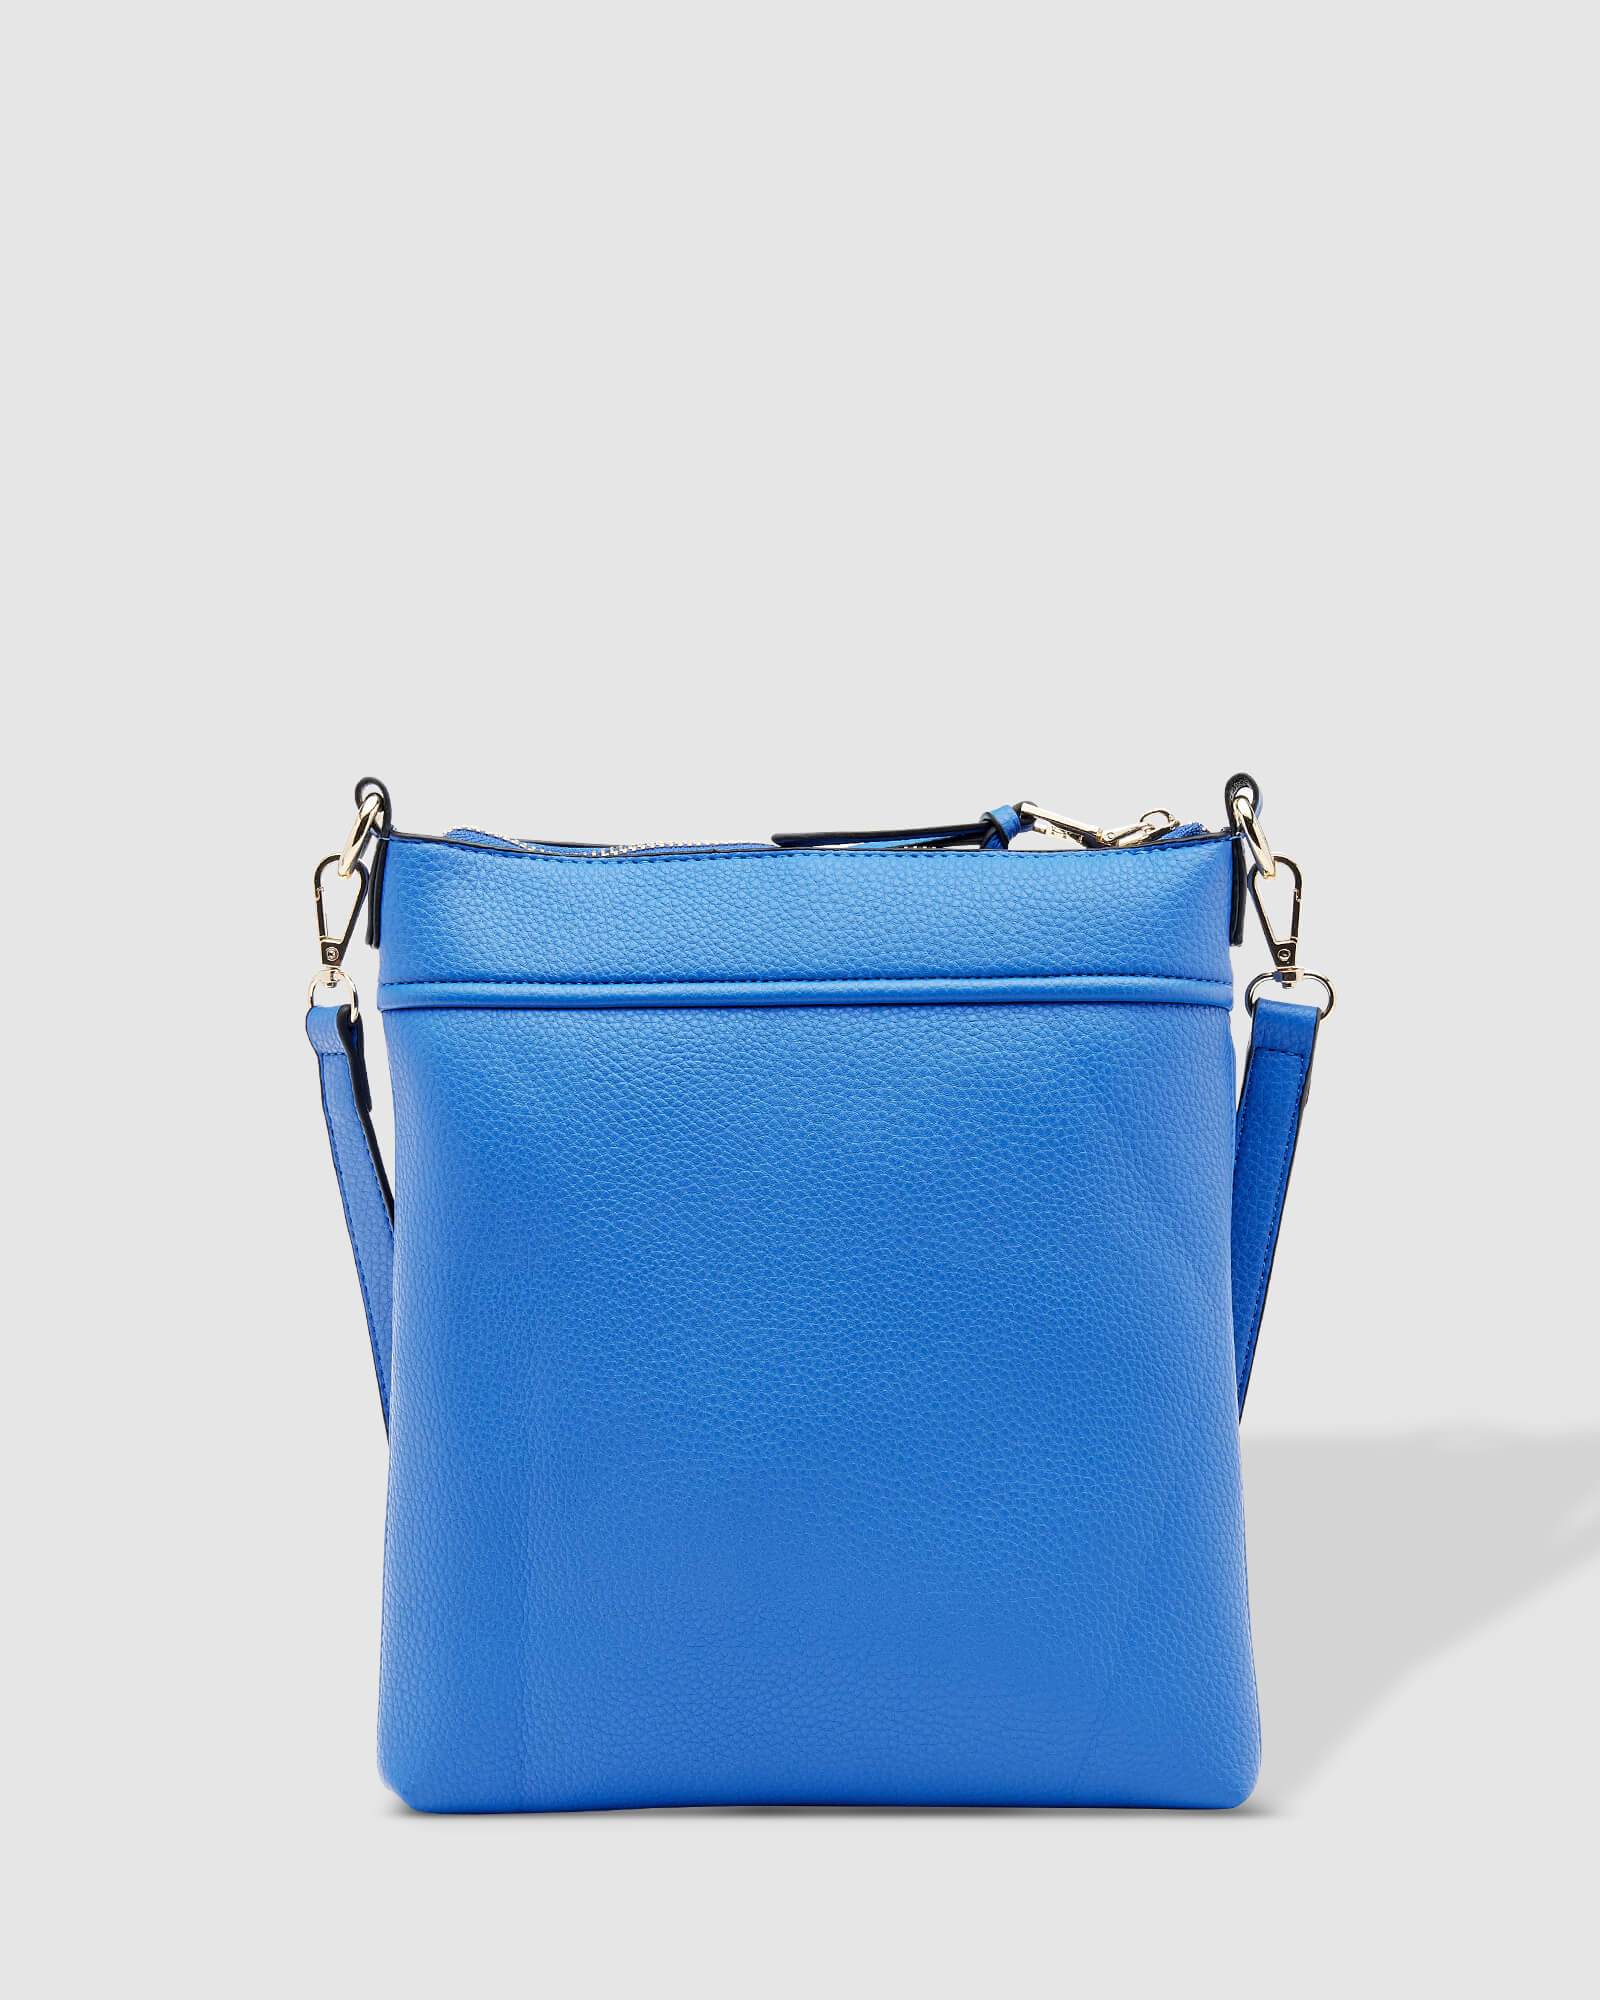 GUCCI Dionysus Small Leather Shoulder Bag in Blue With Crystal Buckle |  COCOON